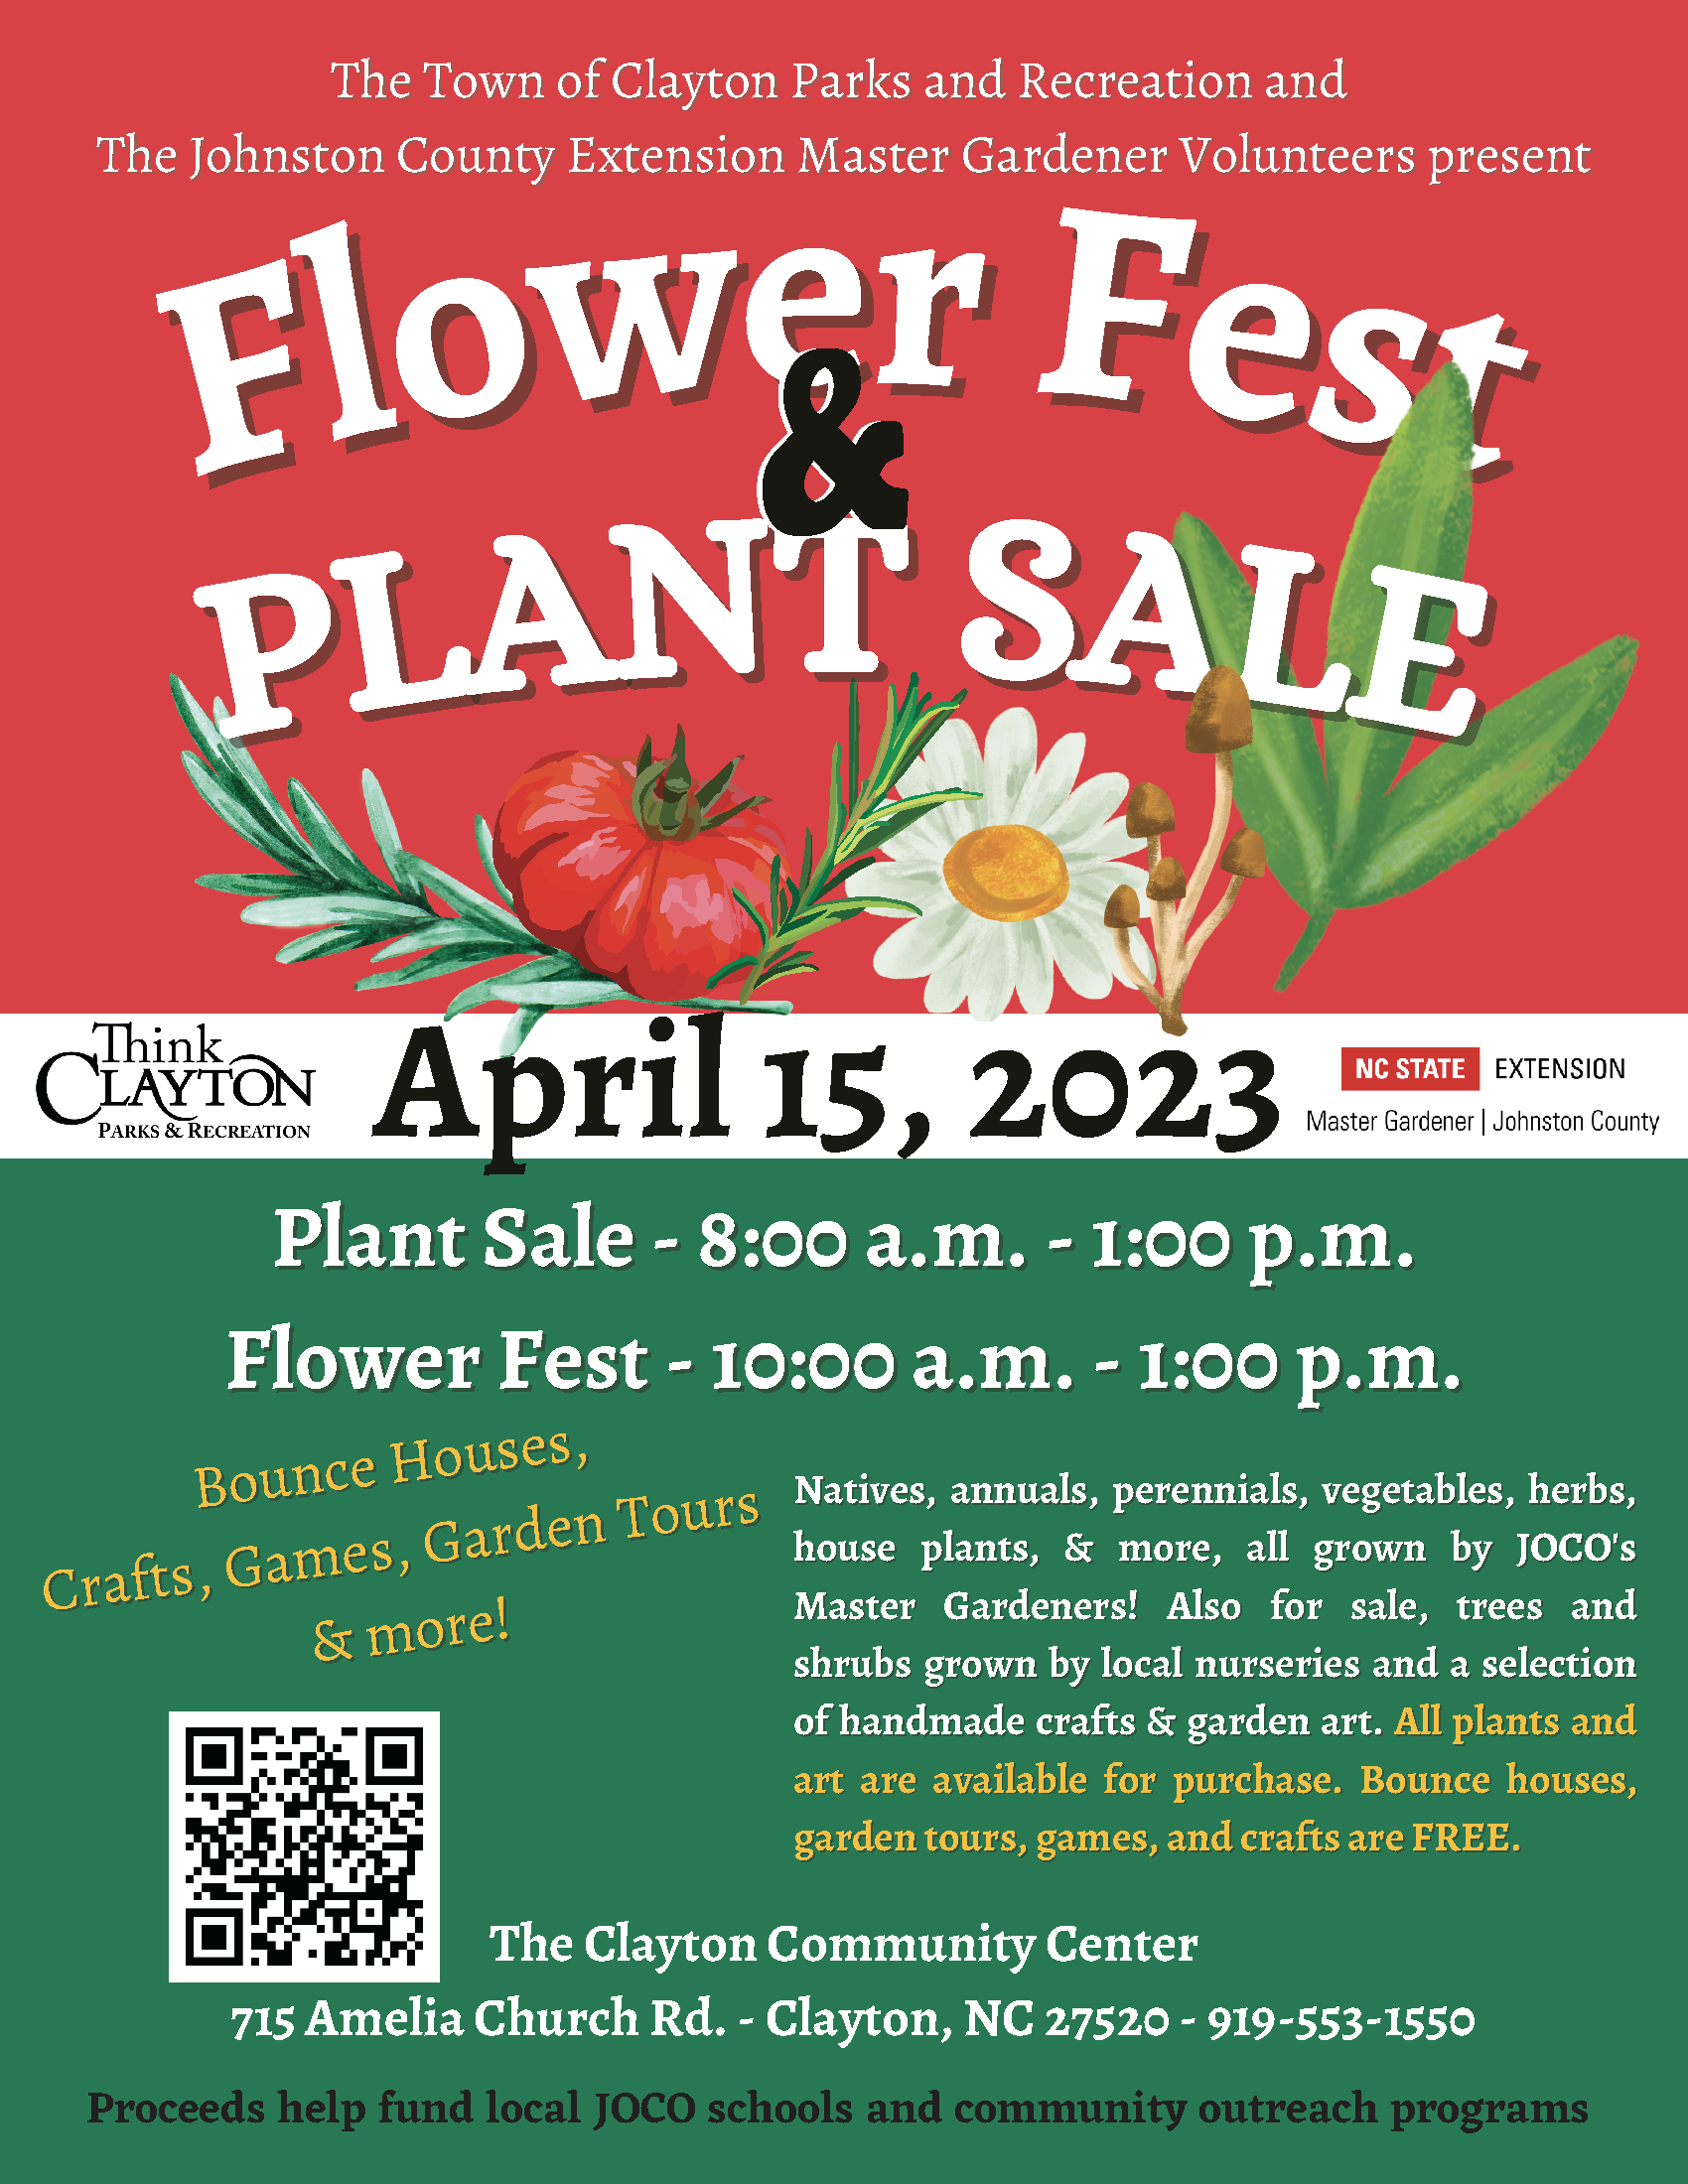 Plant and Flower Festivals - South Carolina Department of Agriculture